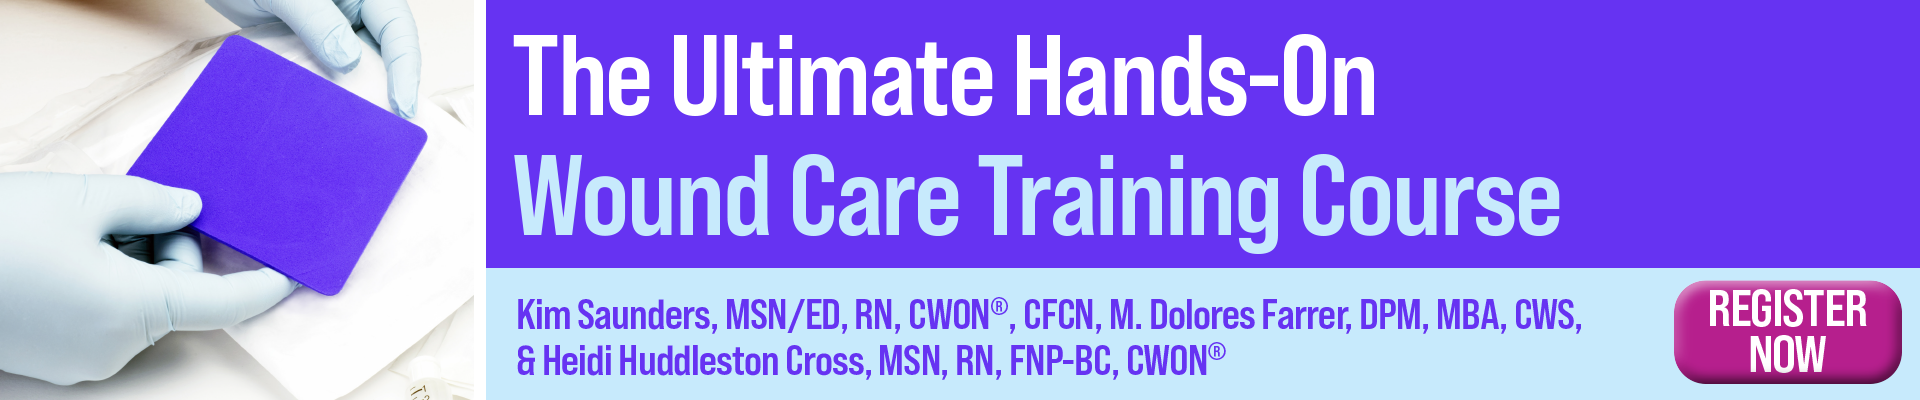 The Ultimate Hands-On Wound Care Training Course